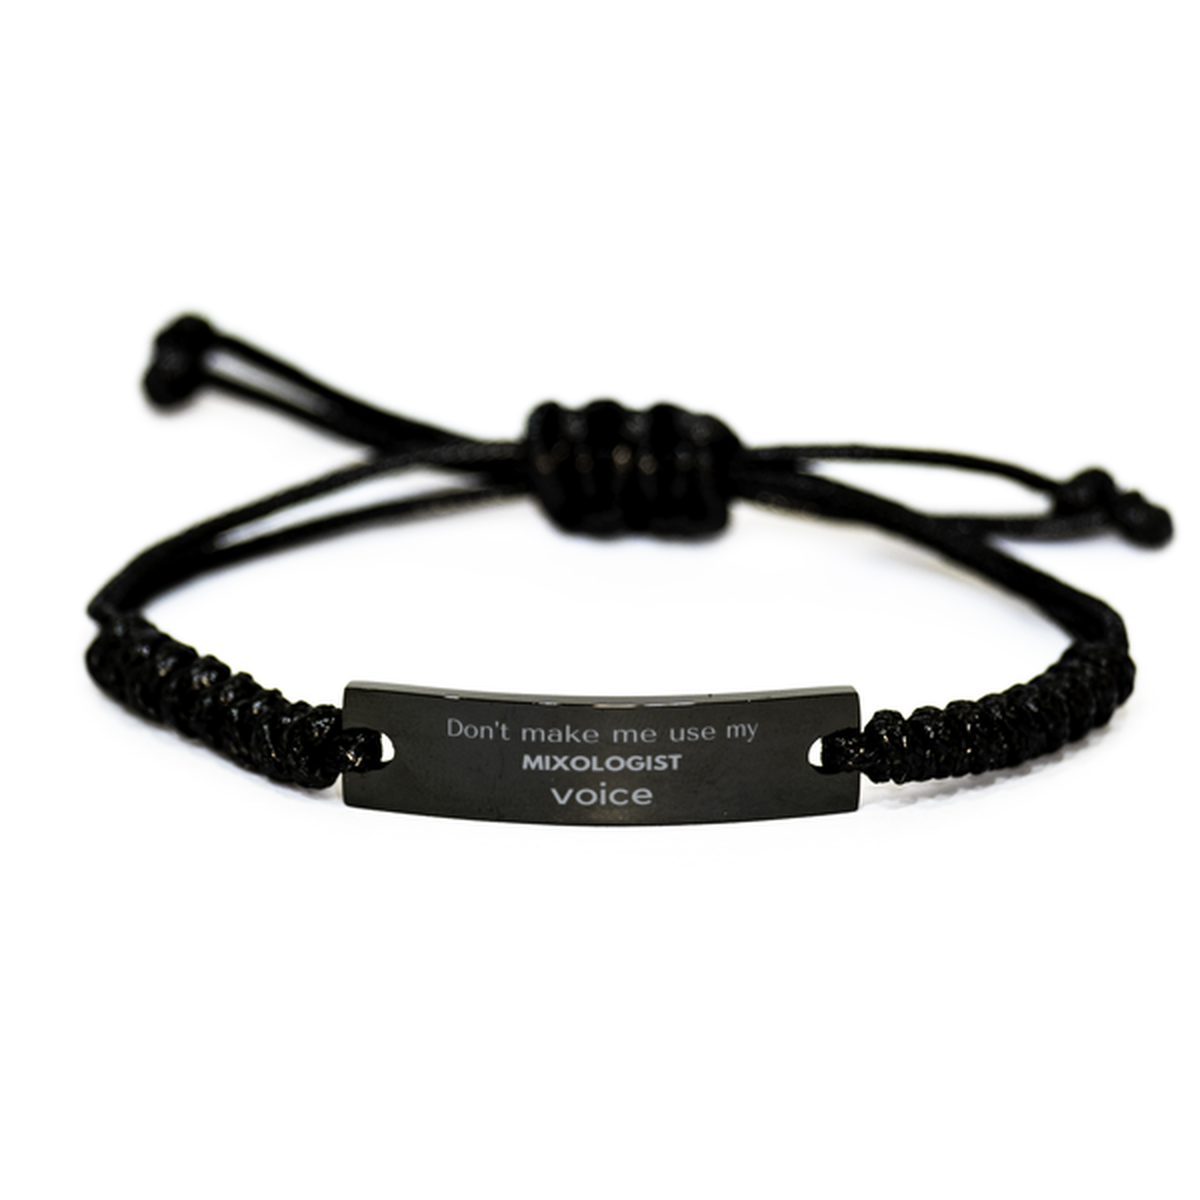 Don't make me use my Mixologist voice, Sarcasm Mixologist Gifts, Christmas Mixologist Black Rope Bracelet Birthday Unique Gifts For Mixologist Coworkers, Men, Women, Colleague, Friends